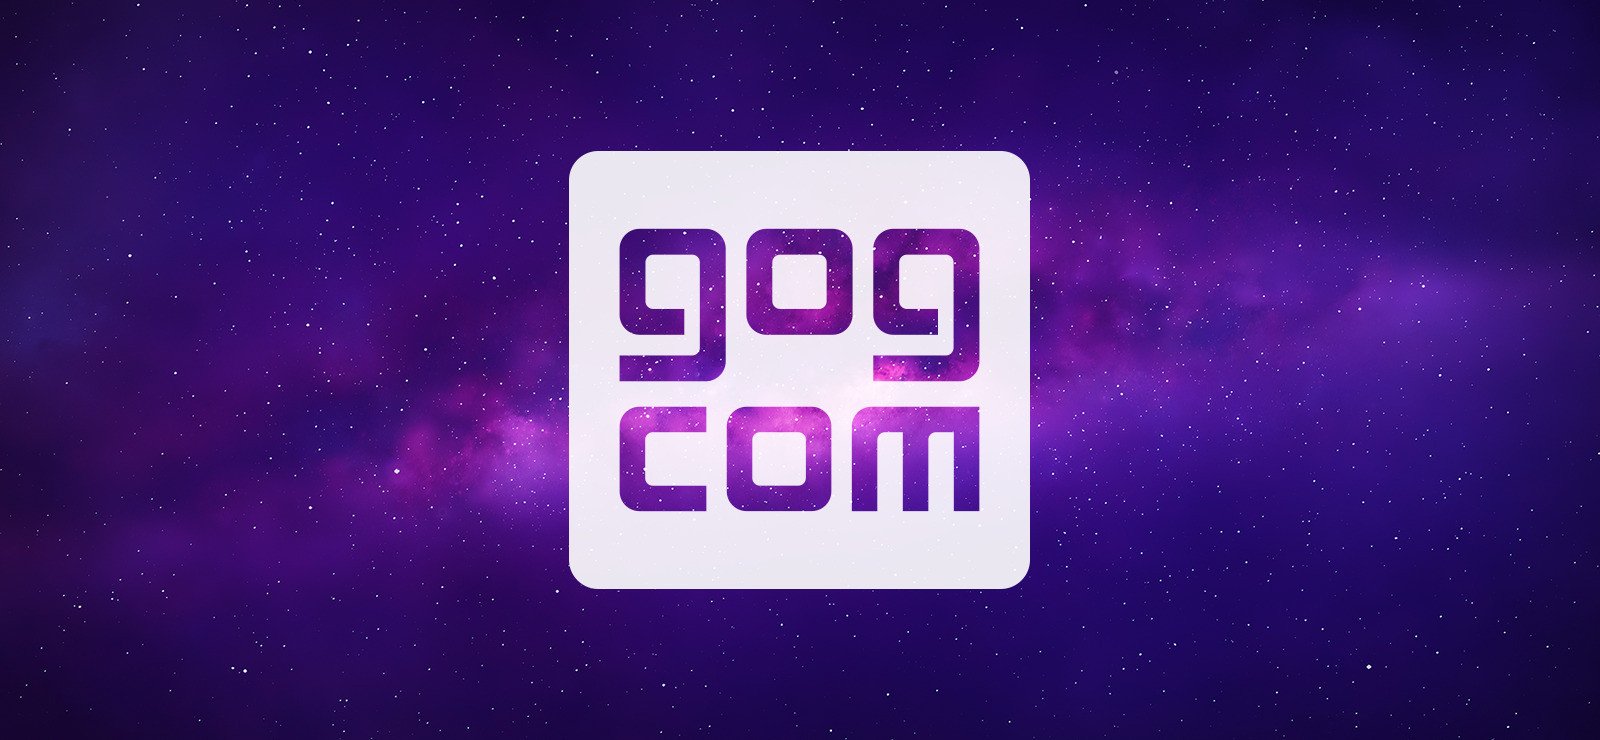 GOG, the new free game is spooky fantasy